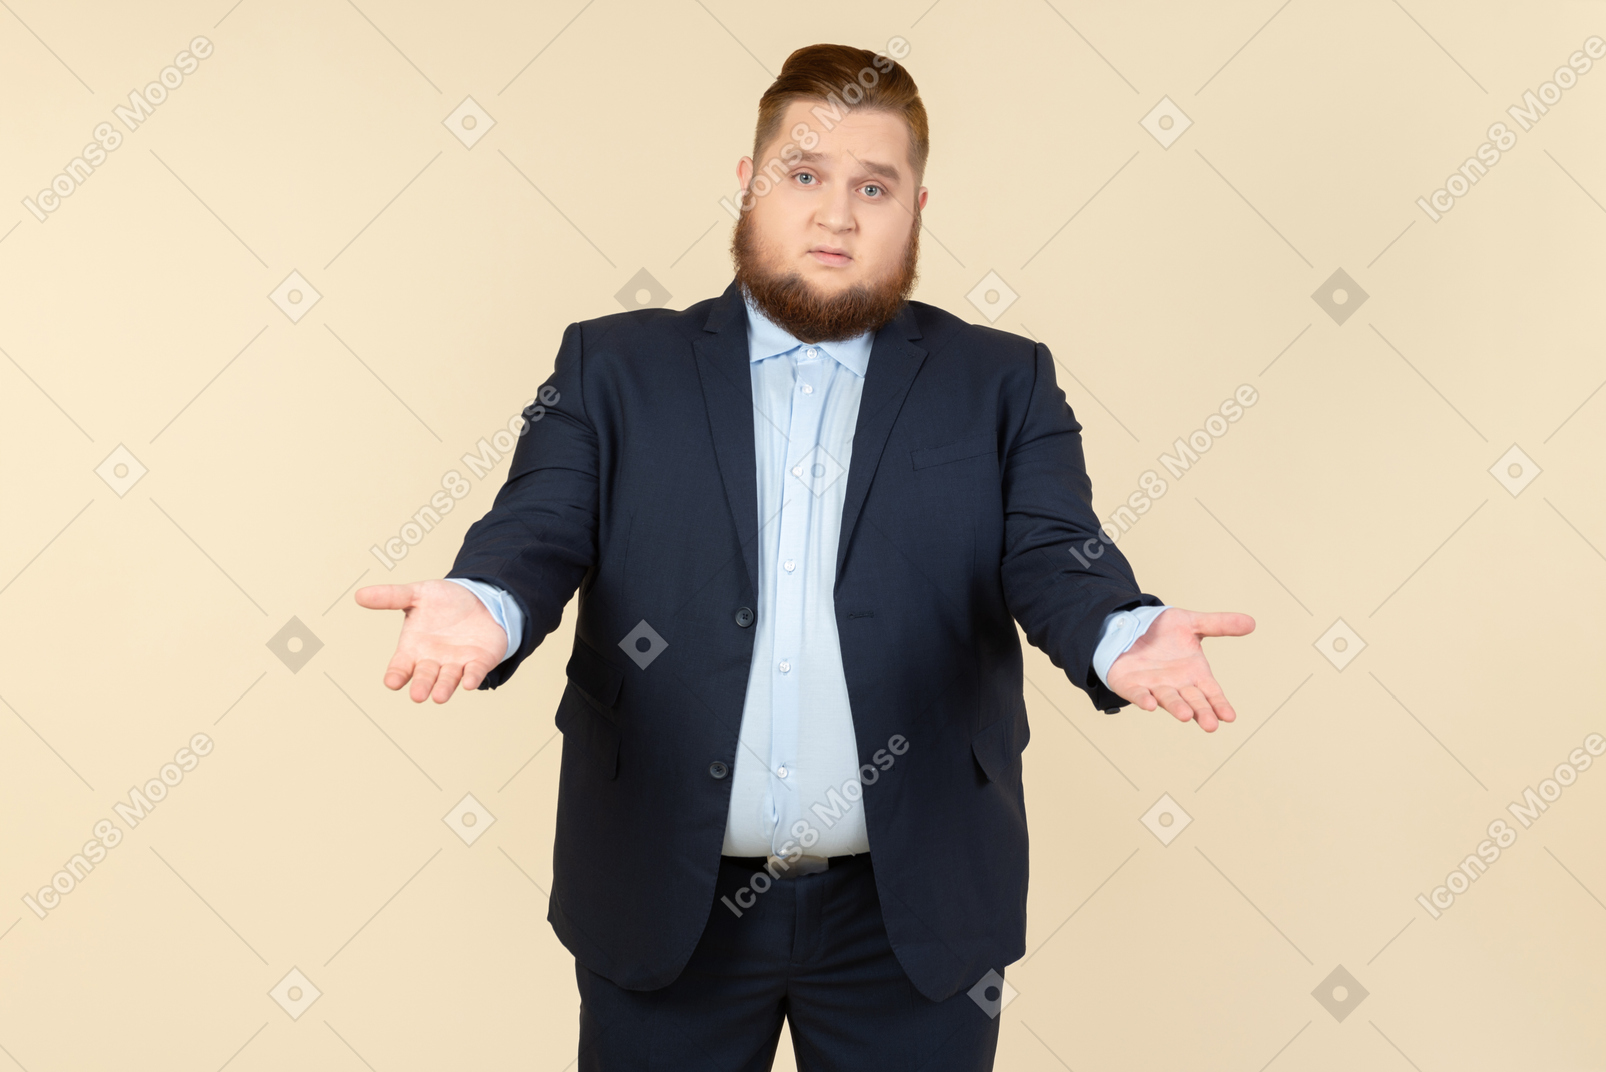 Young overweight man in suit standing with his hands elongated